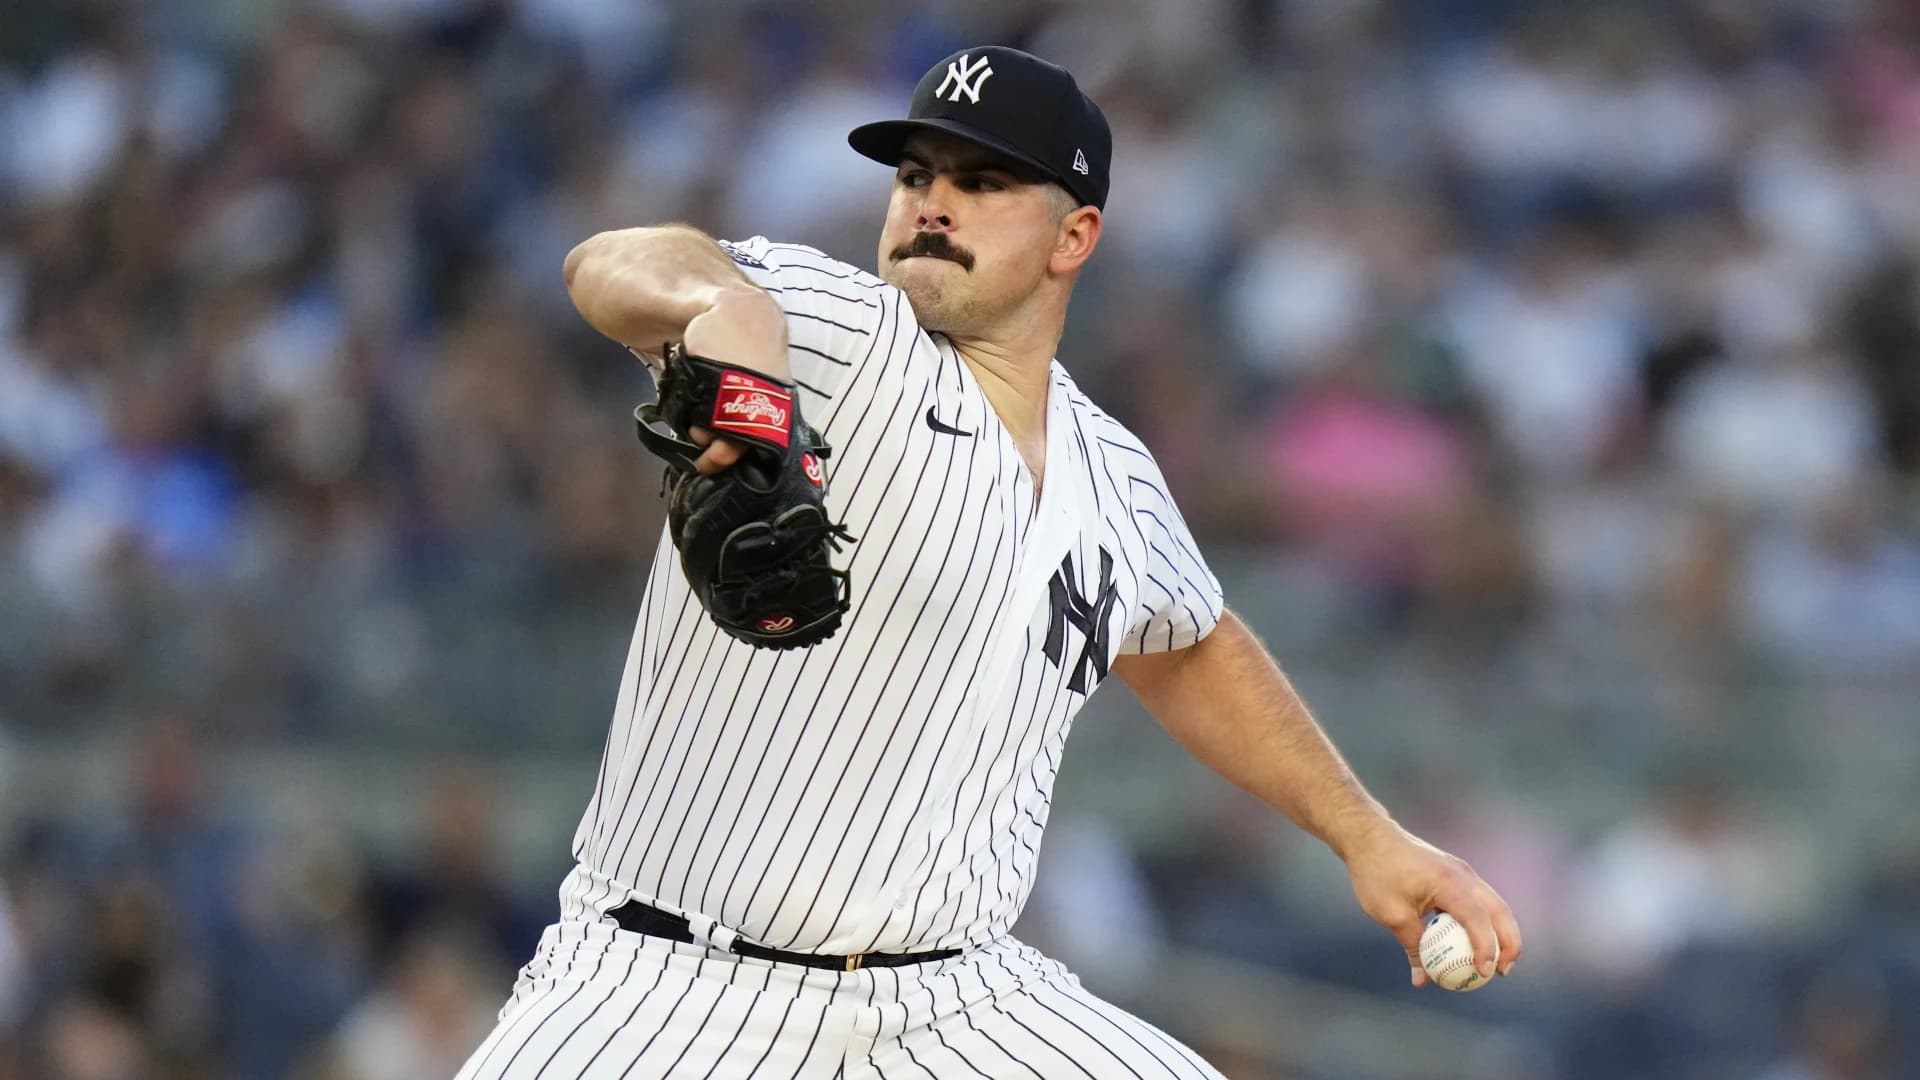 Yankees bring RHP back from injured list; Rodón out with hamstring strain